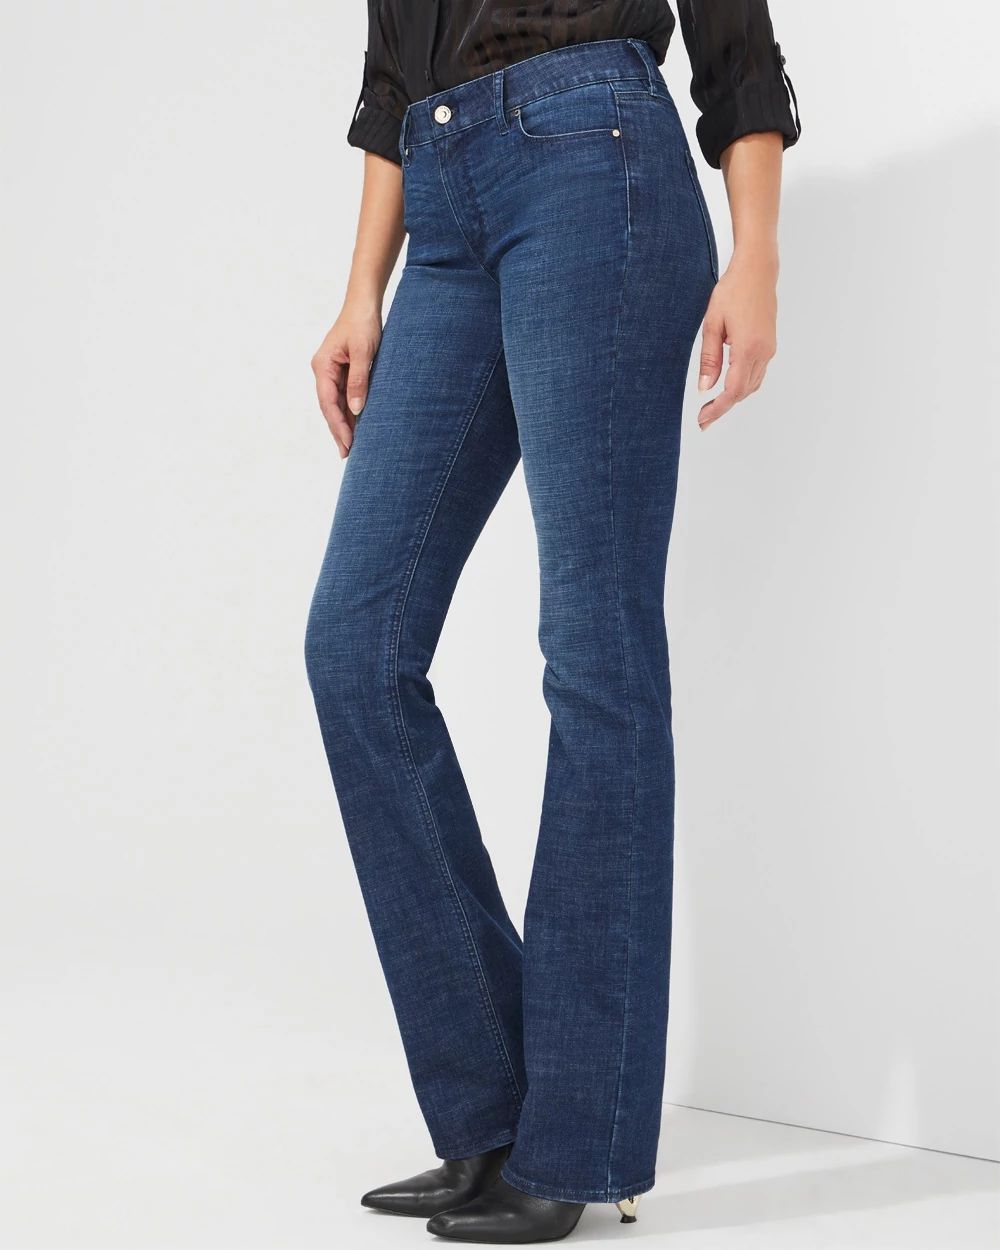 Outlet WHBM Mid Rise Slim Bootcut Jeans